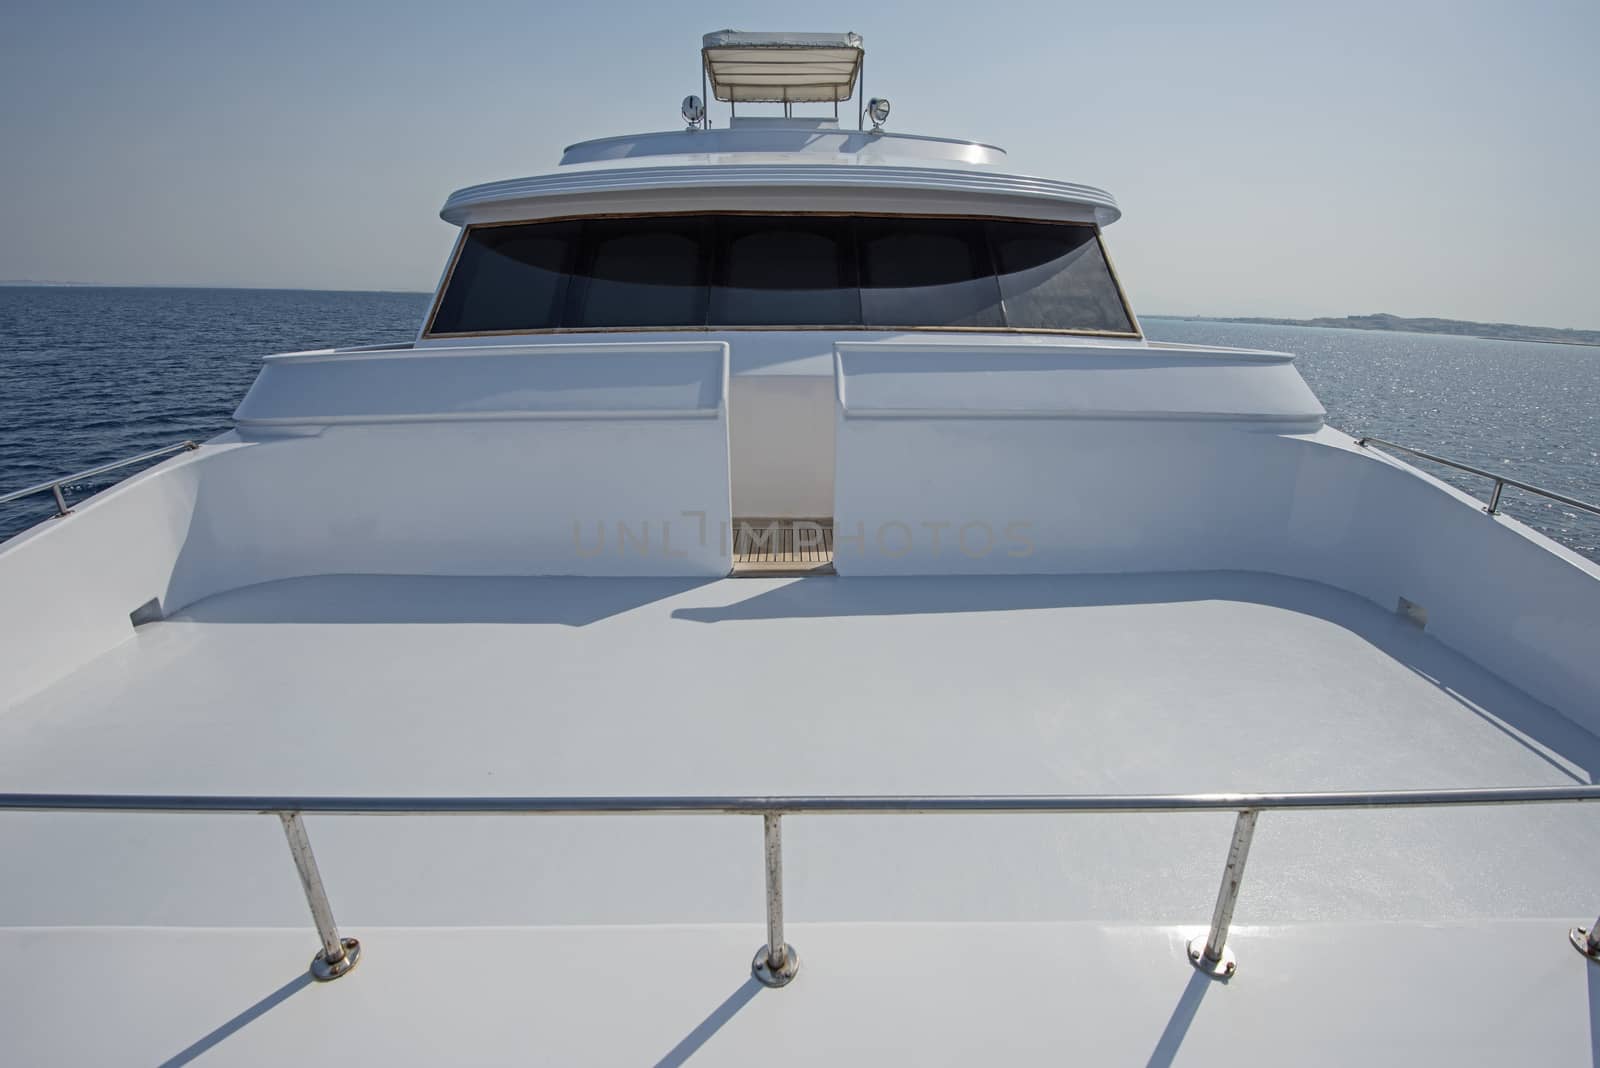 View over the bow of a large luxury motor yacht with flybridge on tropical open ocean